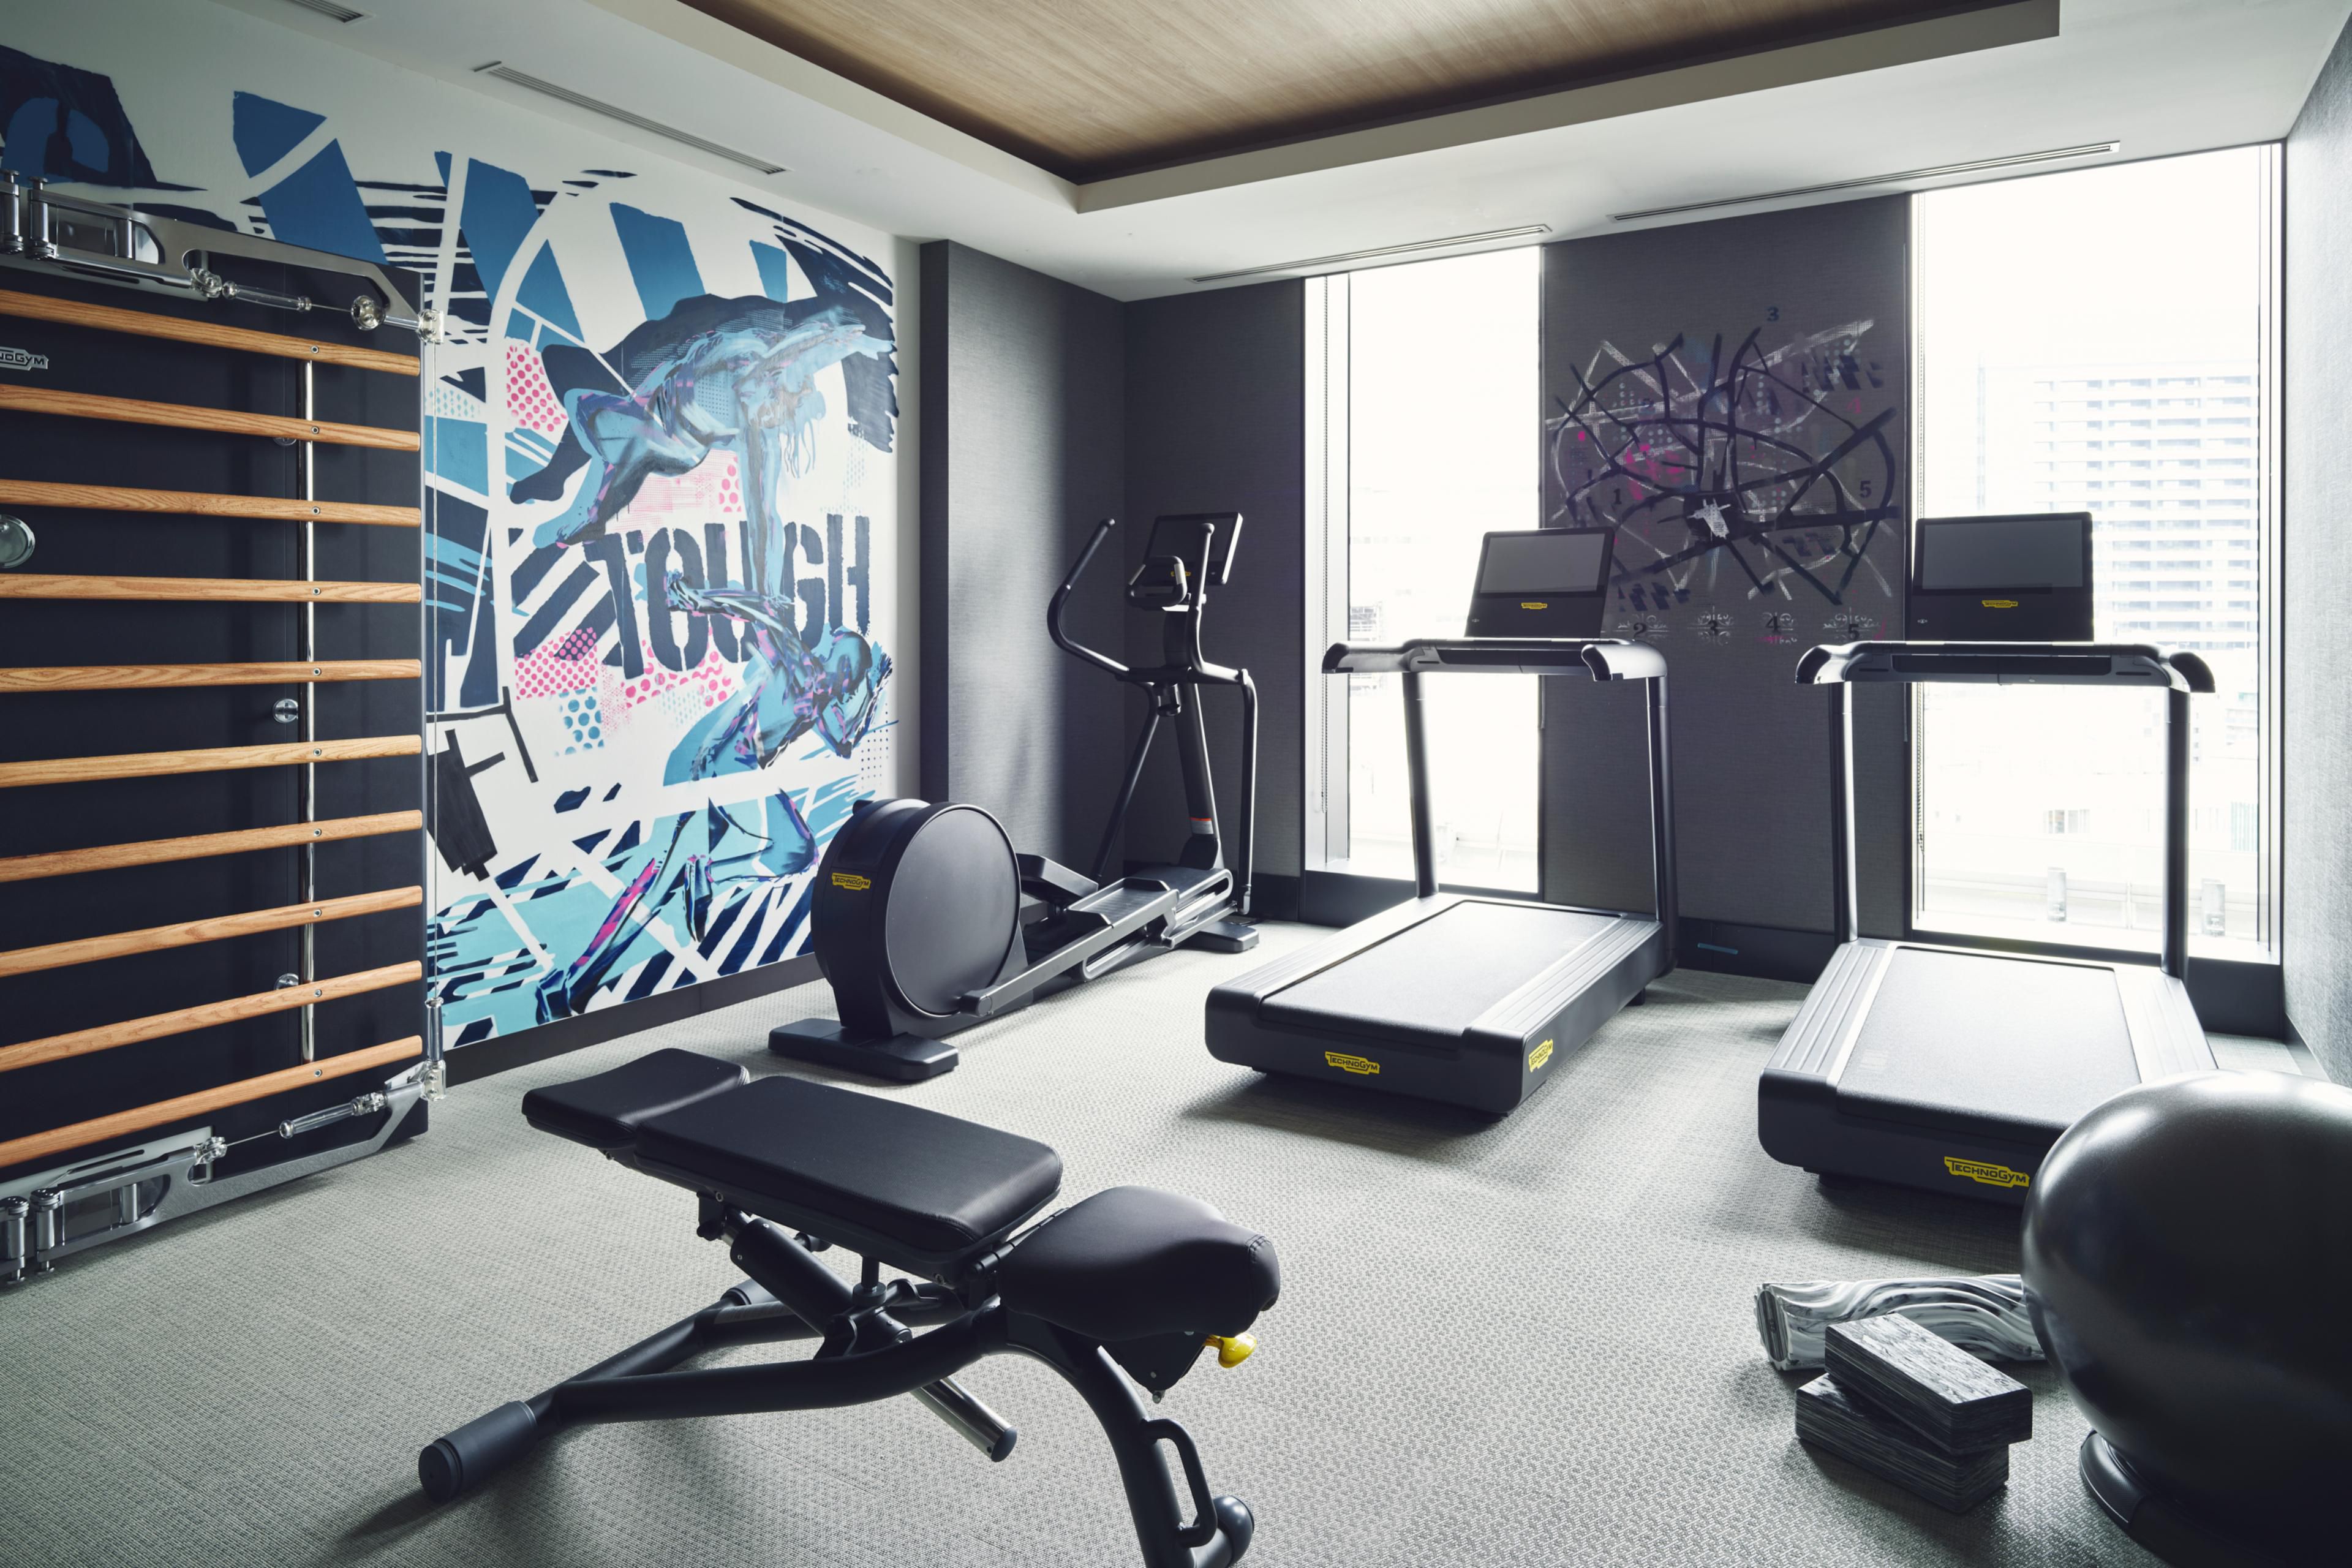 We offer the latest fitness machines to enjoy your own lifestyle during your stay.
The machines are equipped with Technogym equipment, which is used by top athletes and celebrities around the world for its sophisticated design and high technology. The wall artwork, which is designed to help you enjoy your workout will lead you to energetic space.